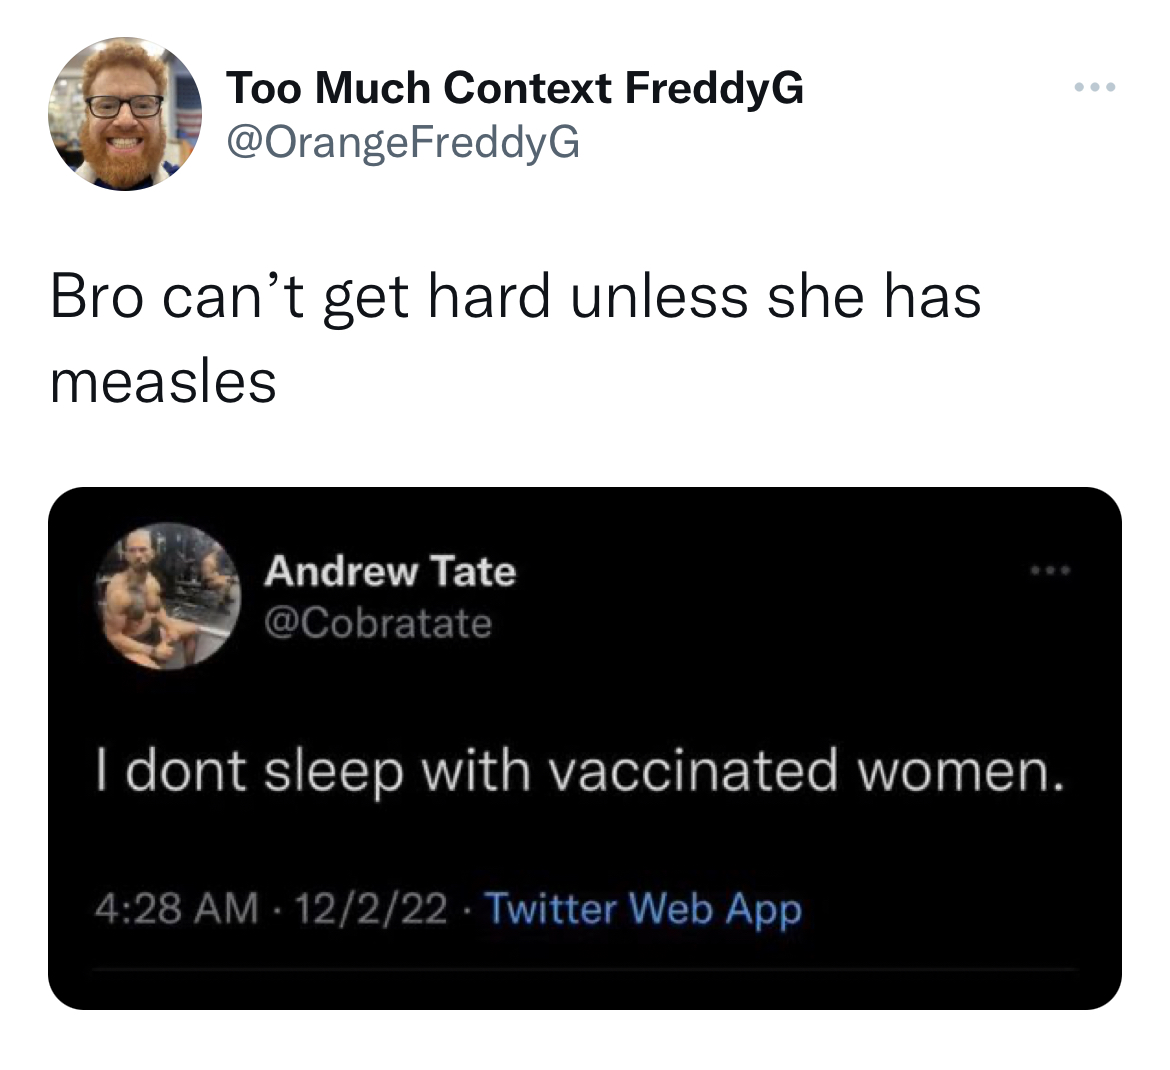 multimedia - Too Much Context FreddyG G Bro can't get hard unless she has measles Andrew Tate I dont sleep with vaccinated women. 12222 Twitter Web App